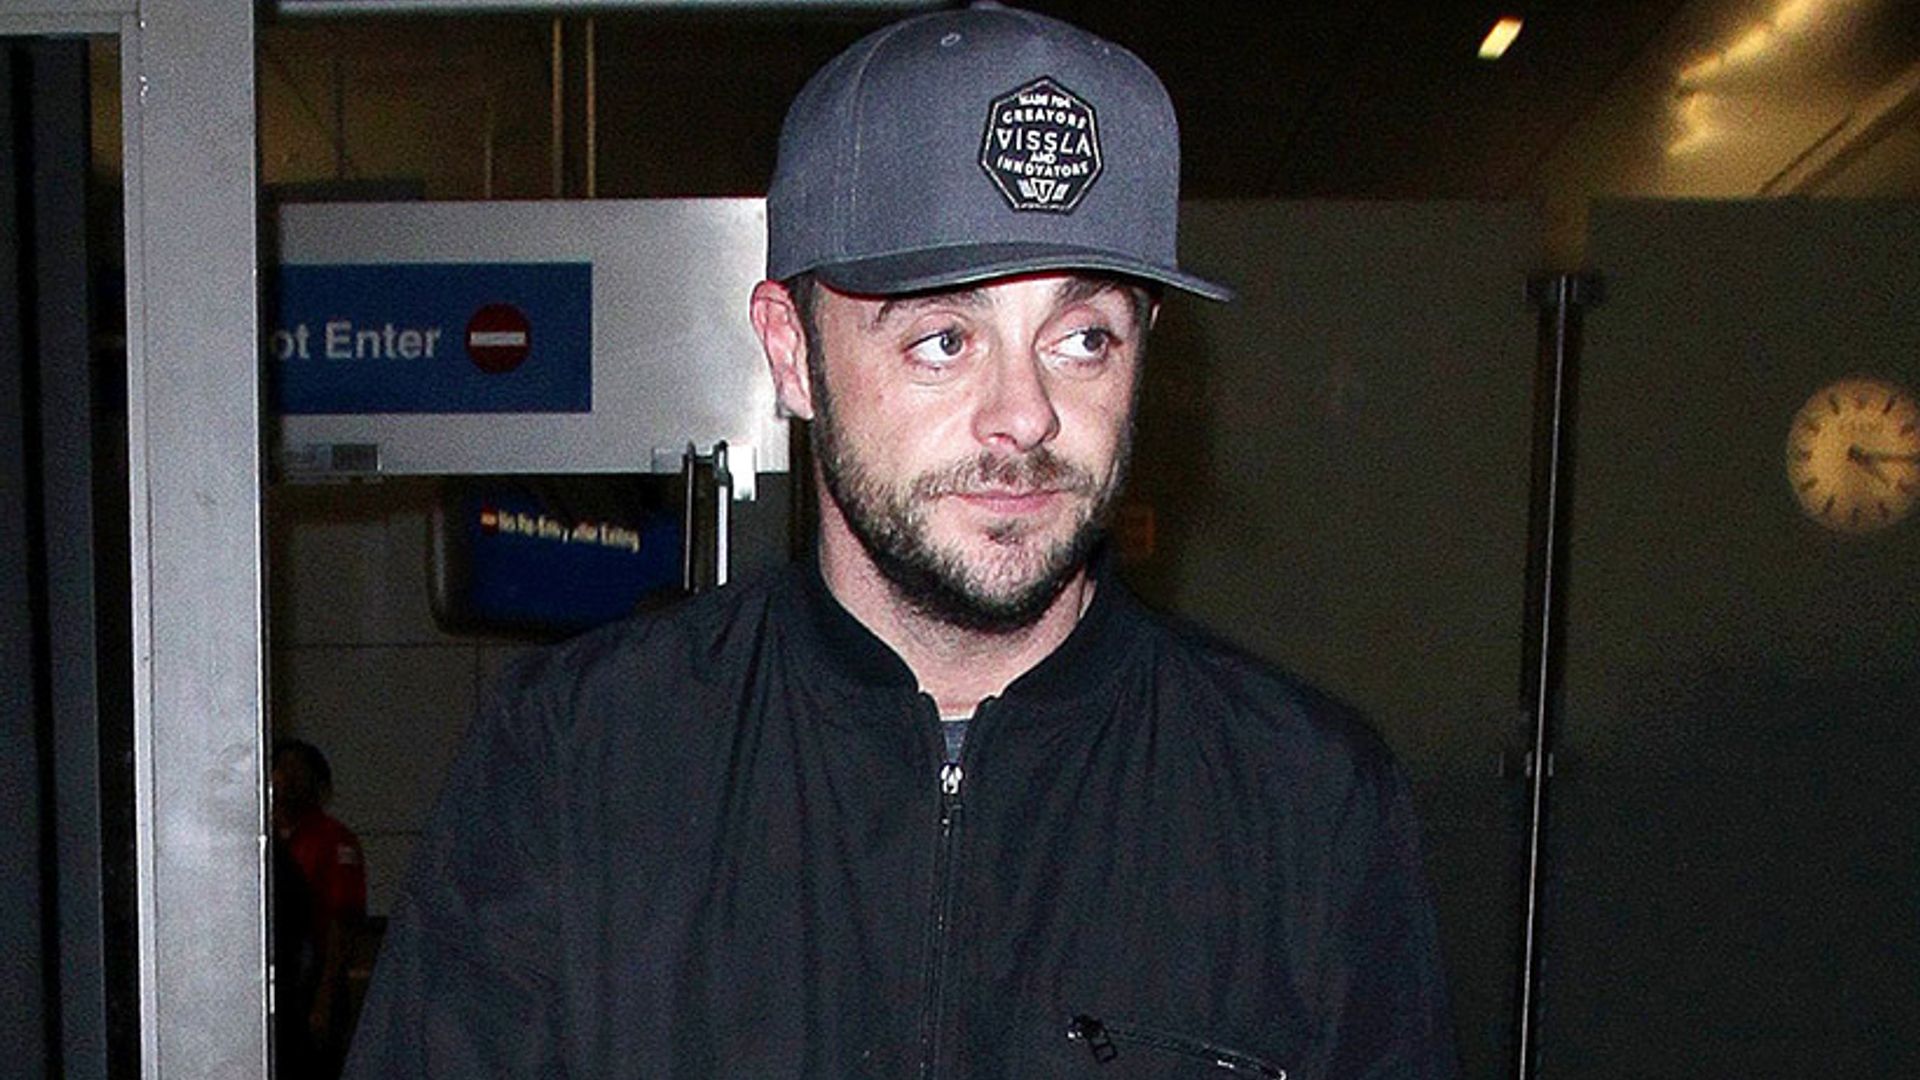 Ant McPartlin flies to LA to 'continue his recovery' following rehab